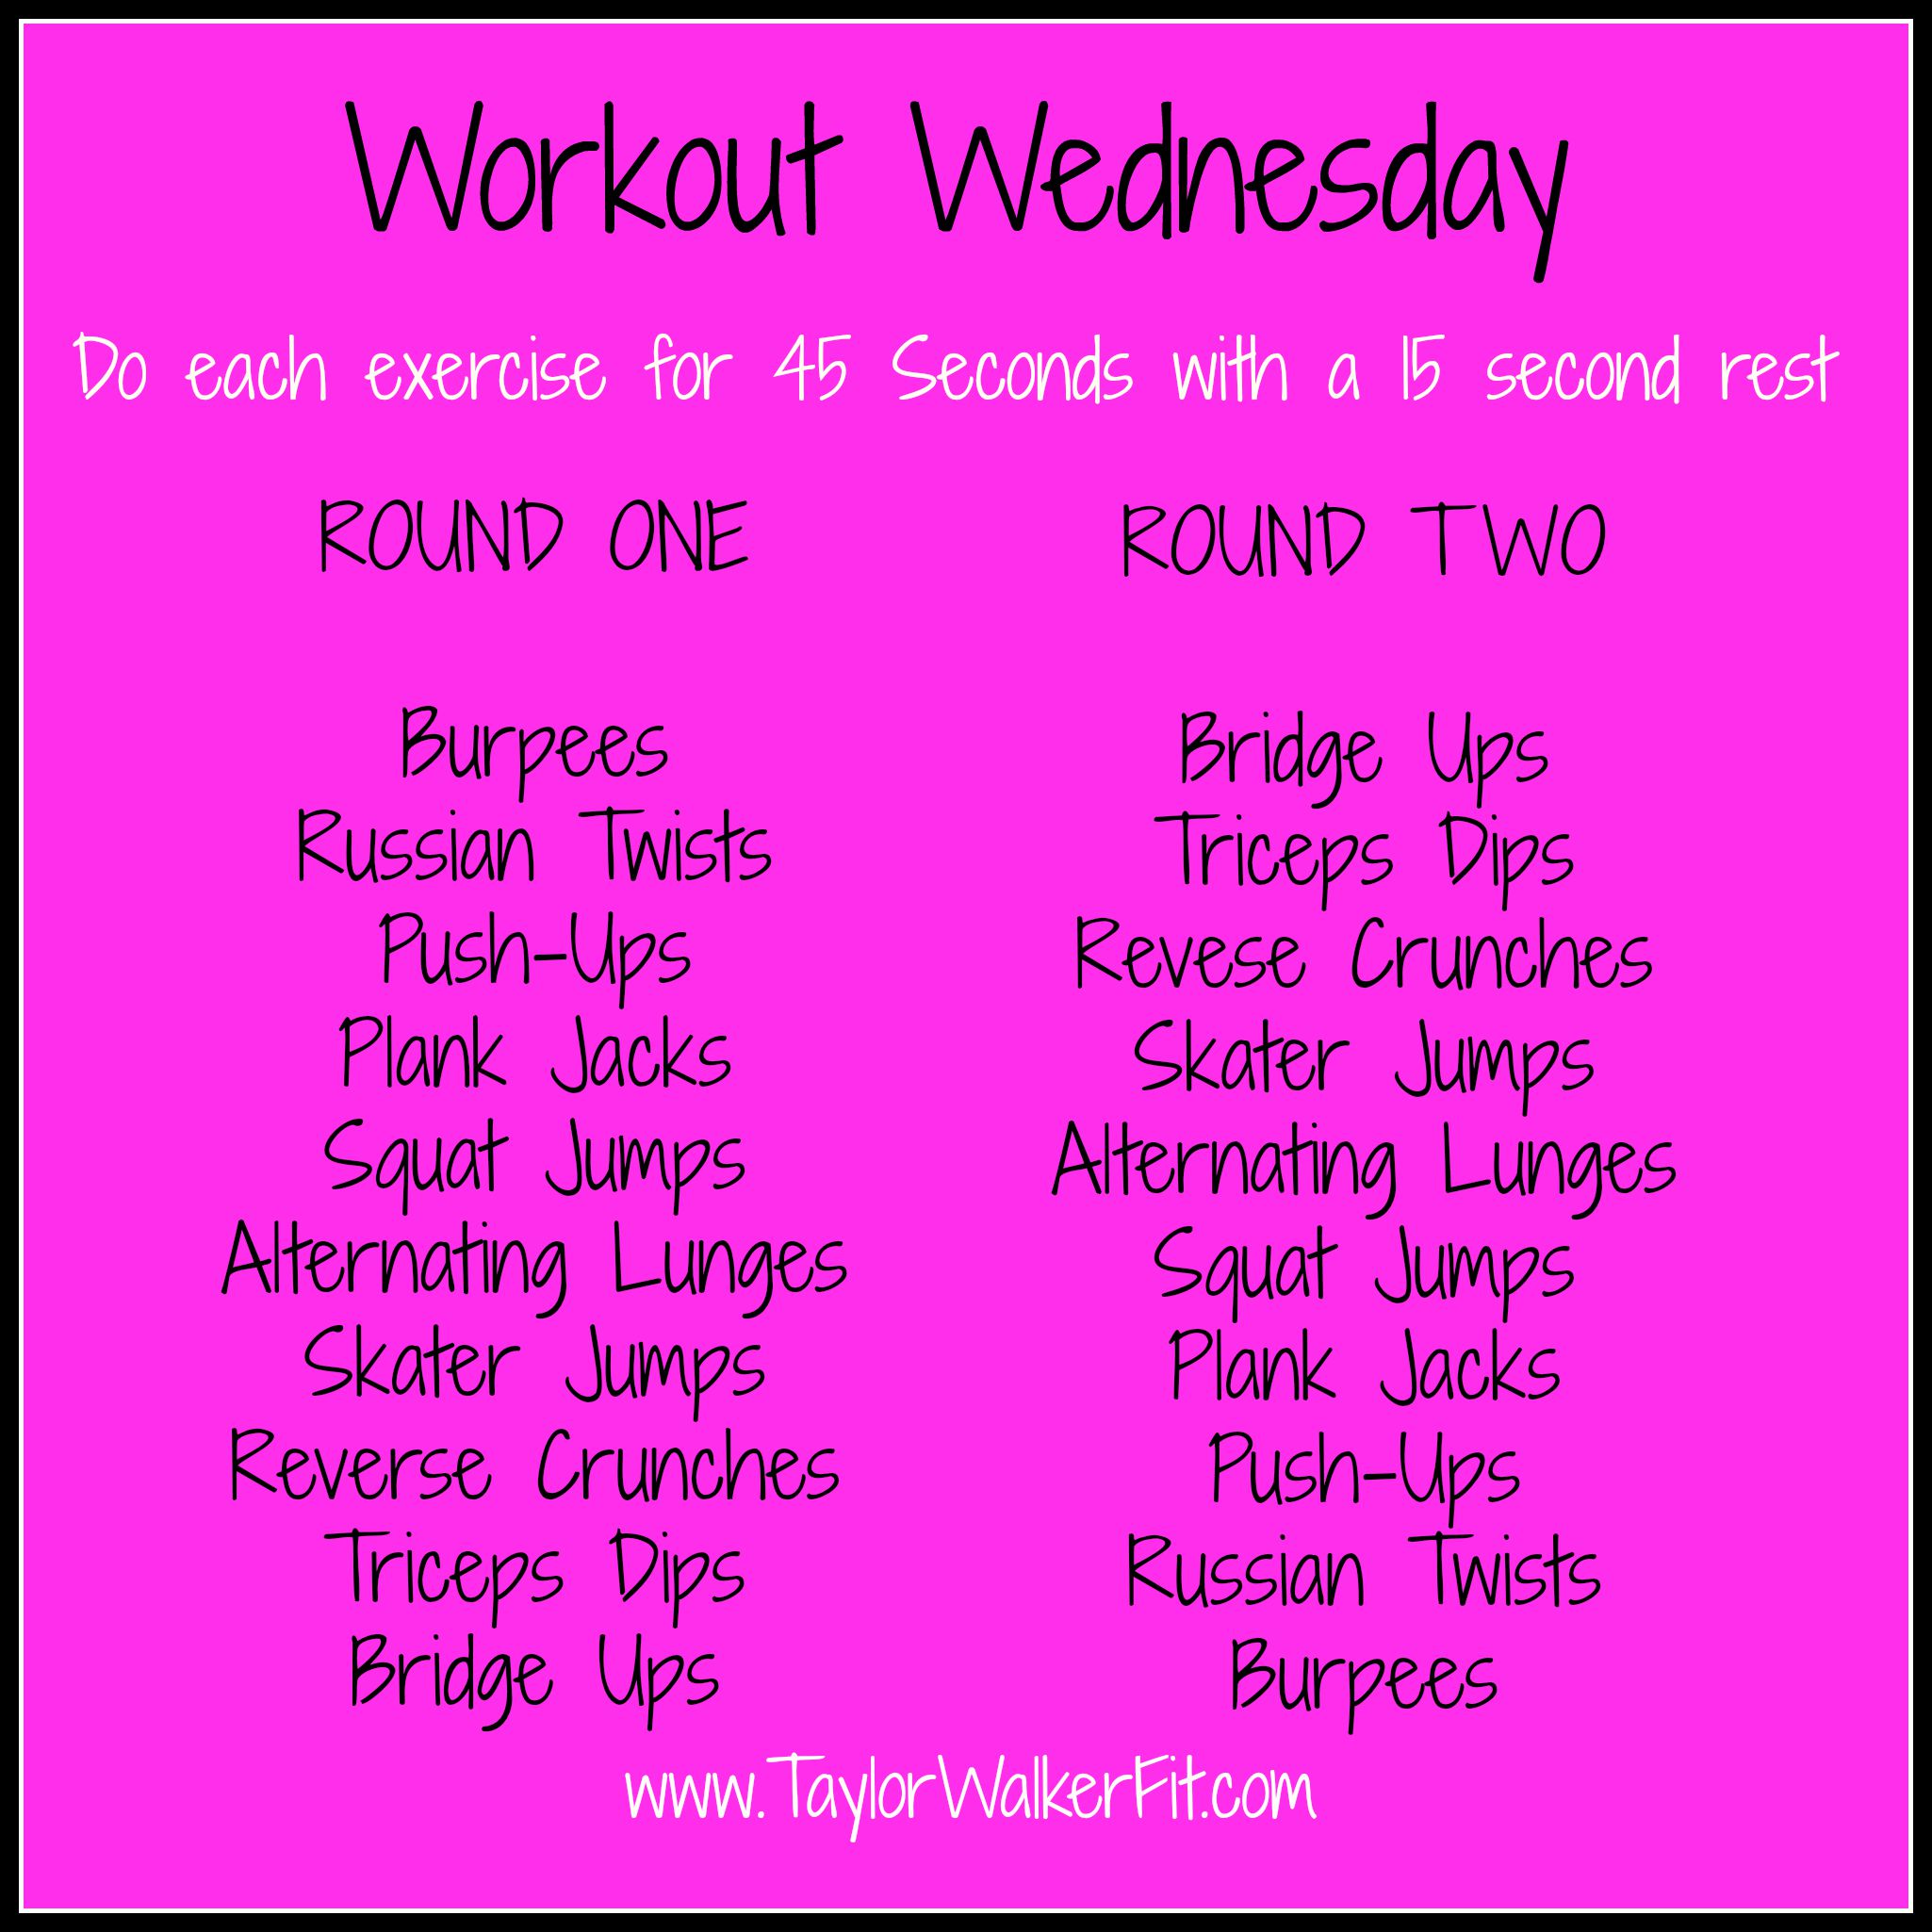 Workout Wednesday-HIIT Workout of the Week - Taylor Walker Fit